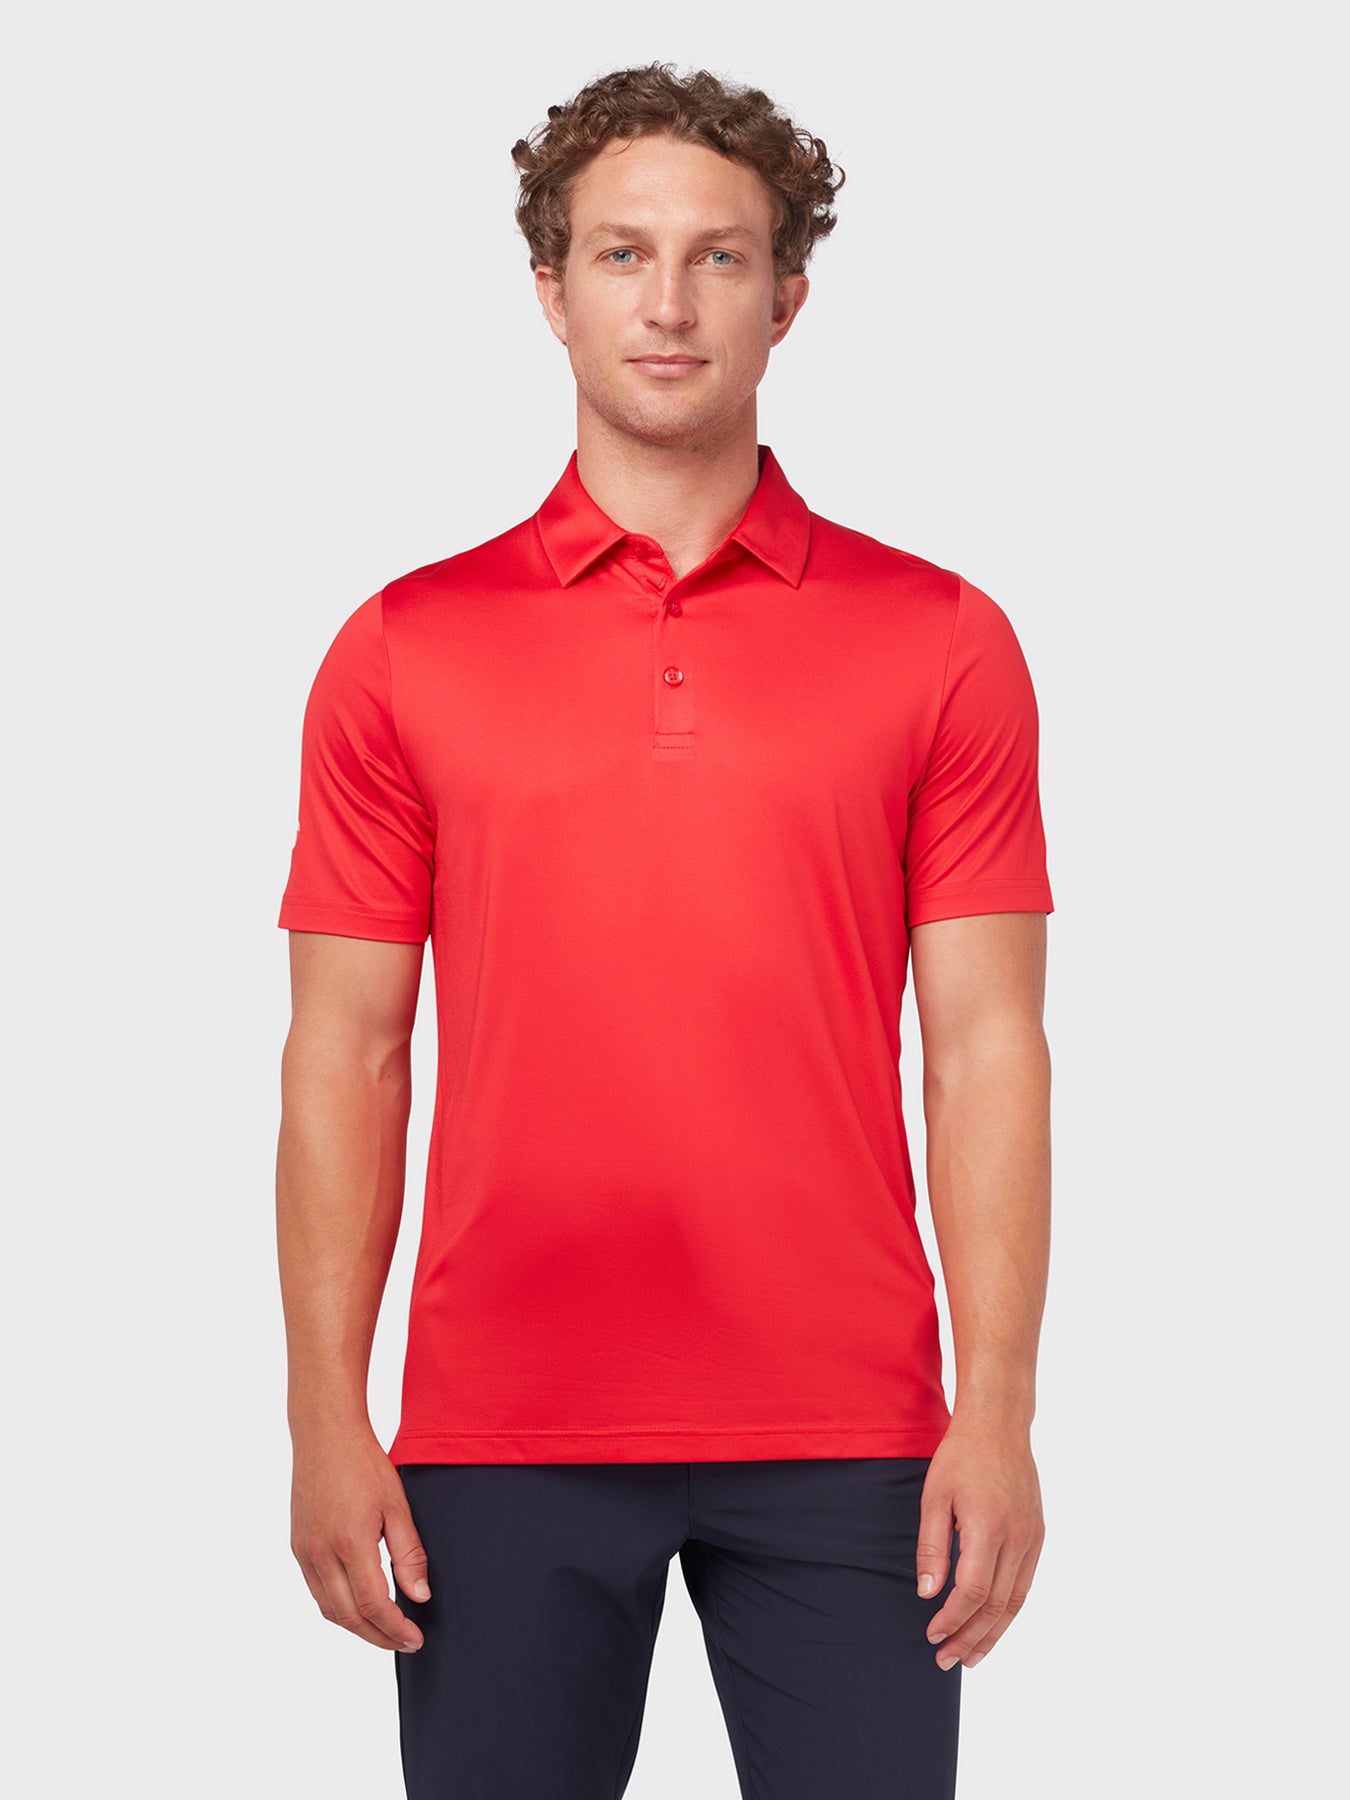 View Swing Tech Tour Polo In True Red True Red XL information